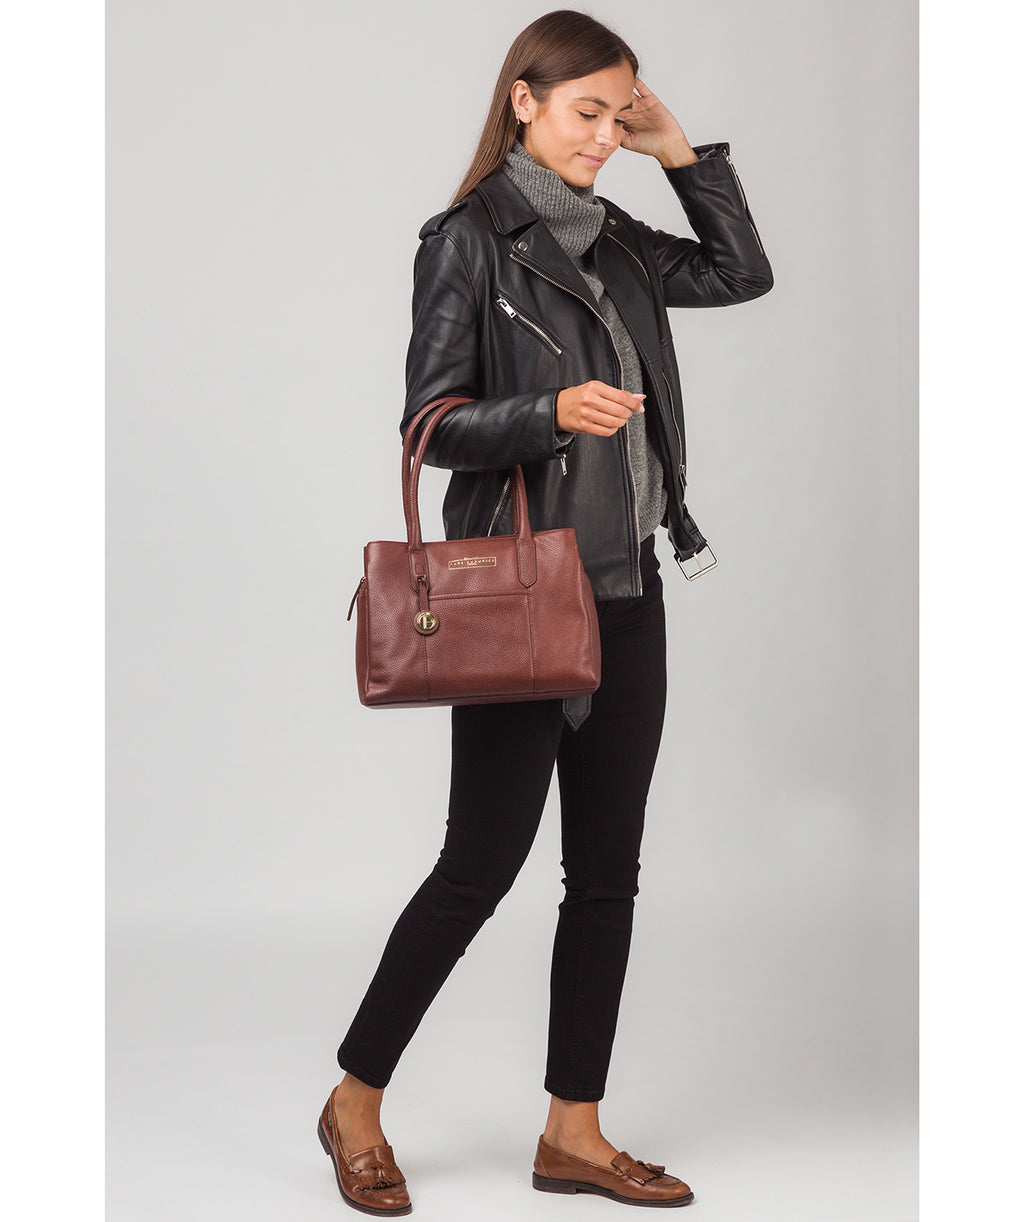 Chestnut Leather Handbag 'Chatham' by Pure Luxuries – Pure Luxuries London